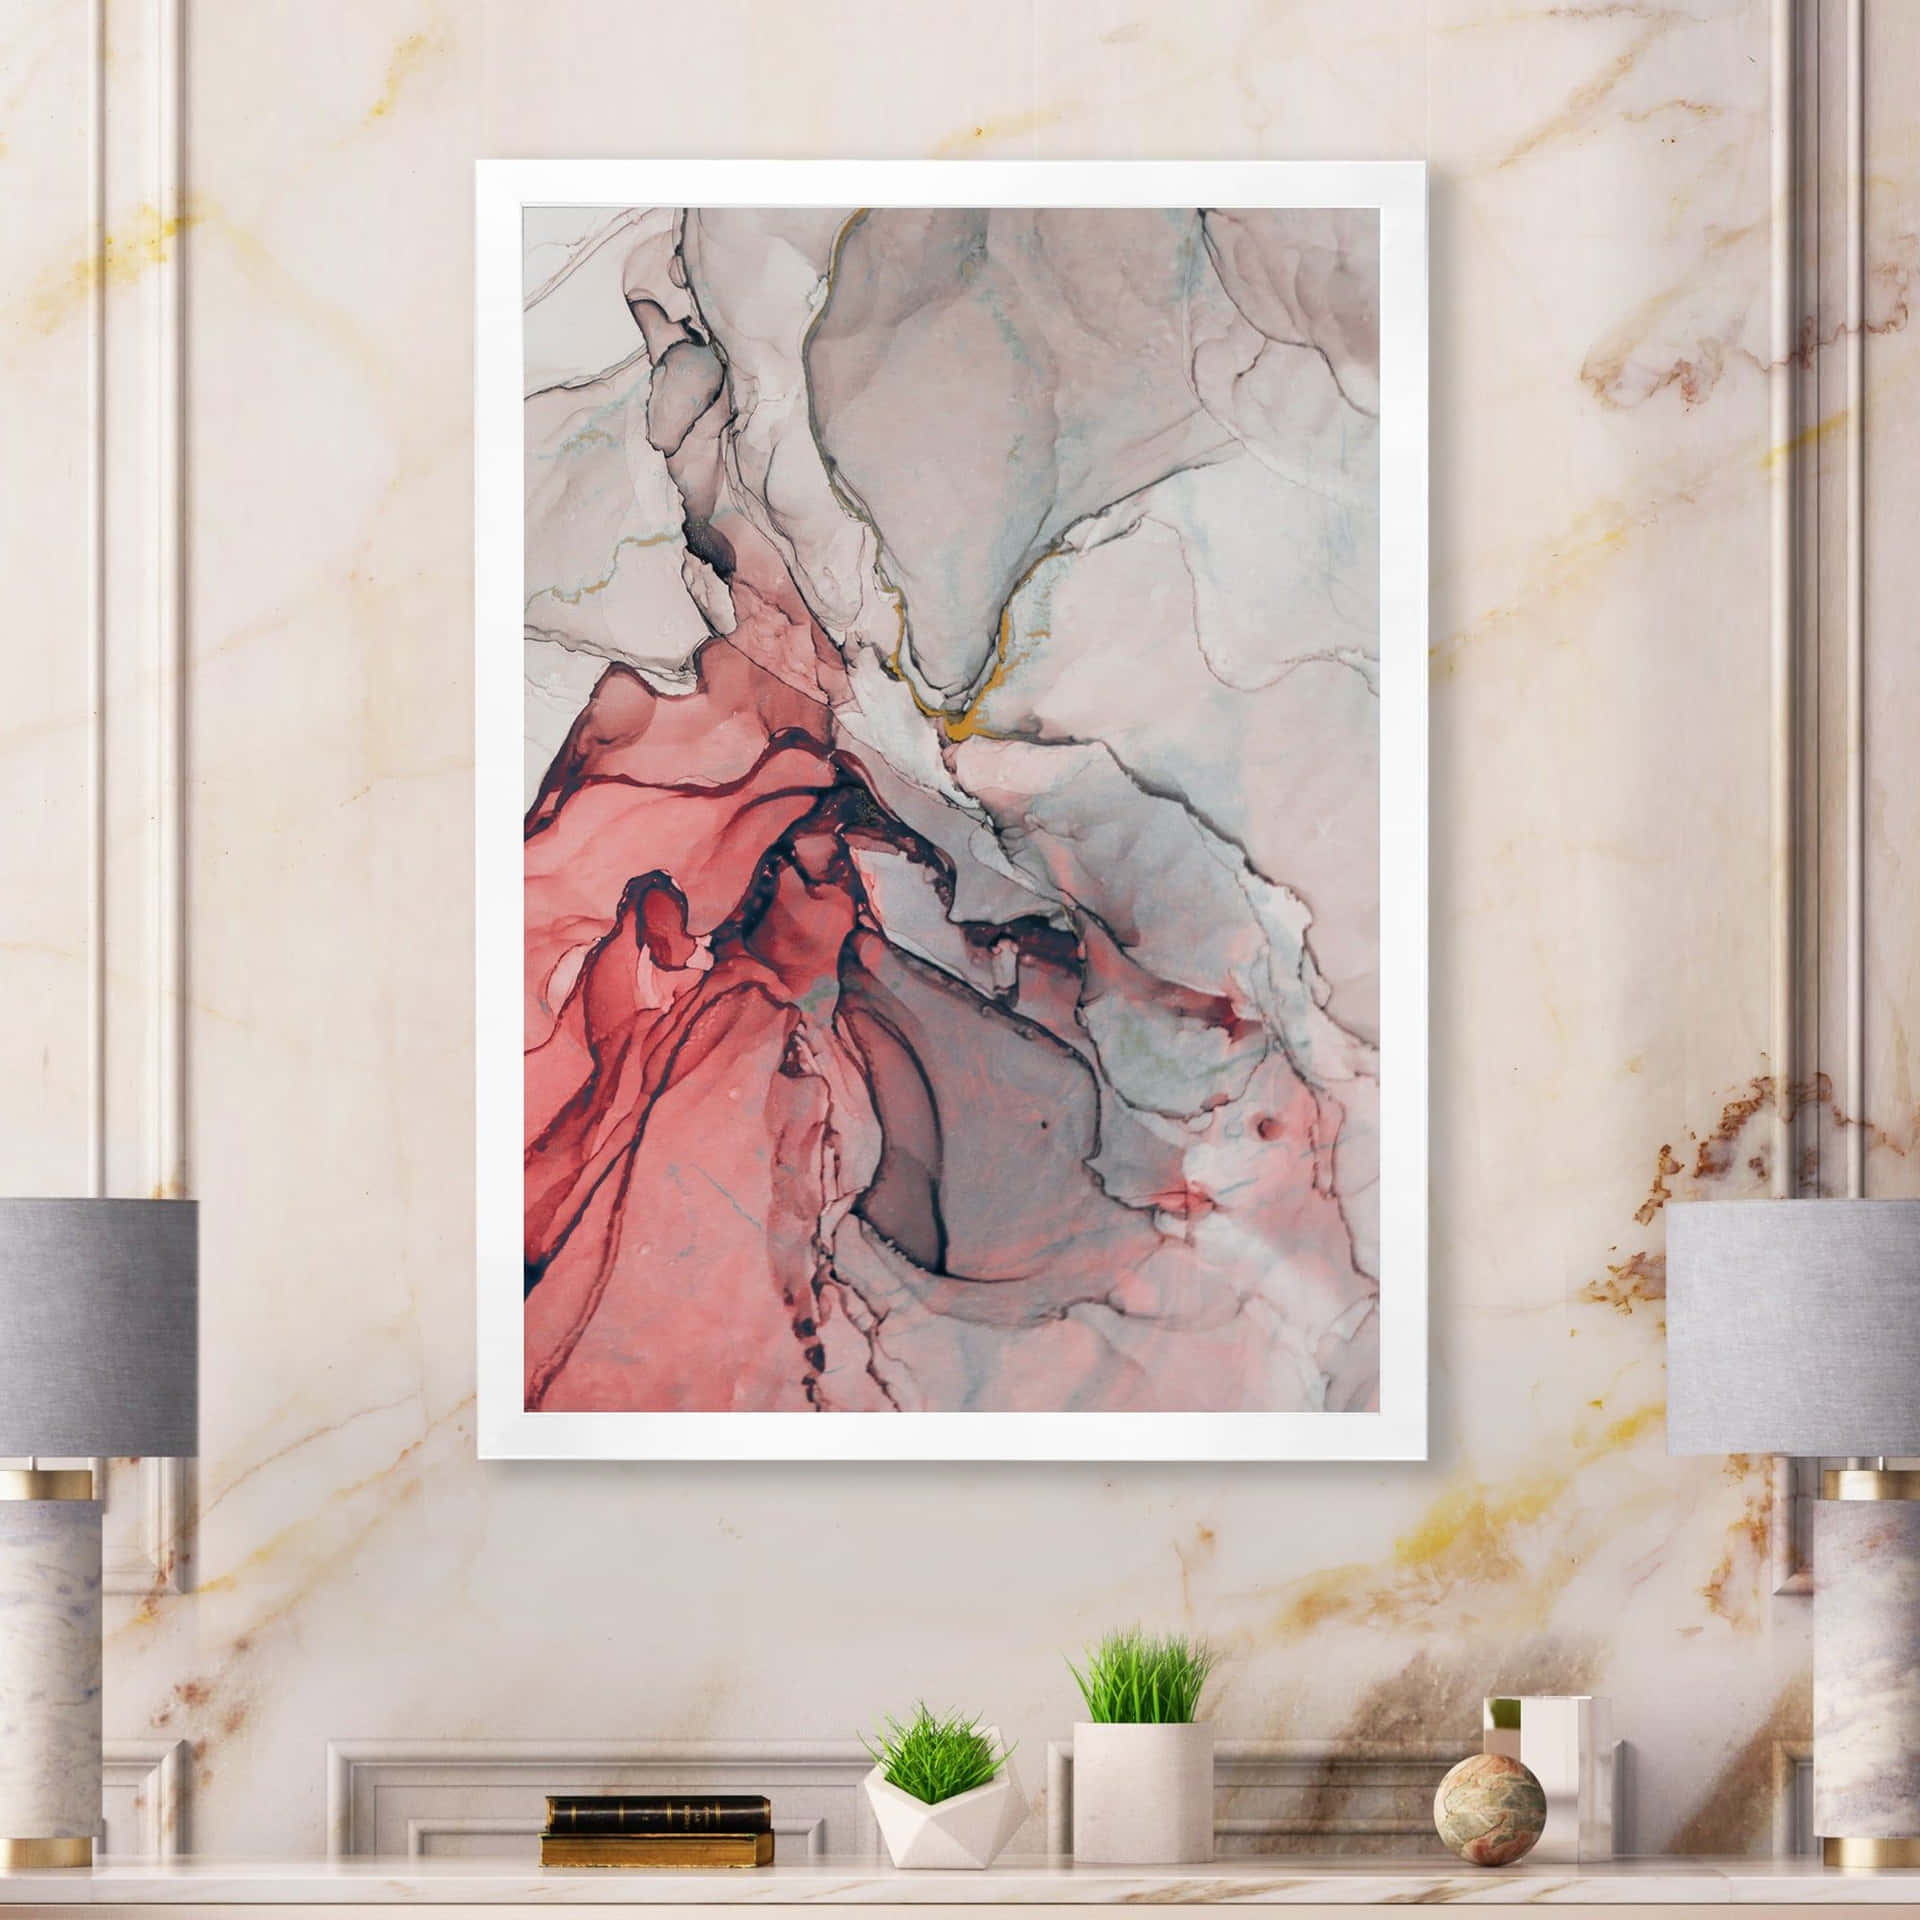 A Pink And White Abstract Painting On A Wall